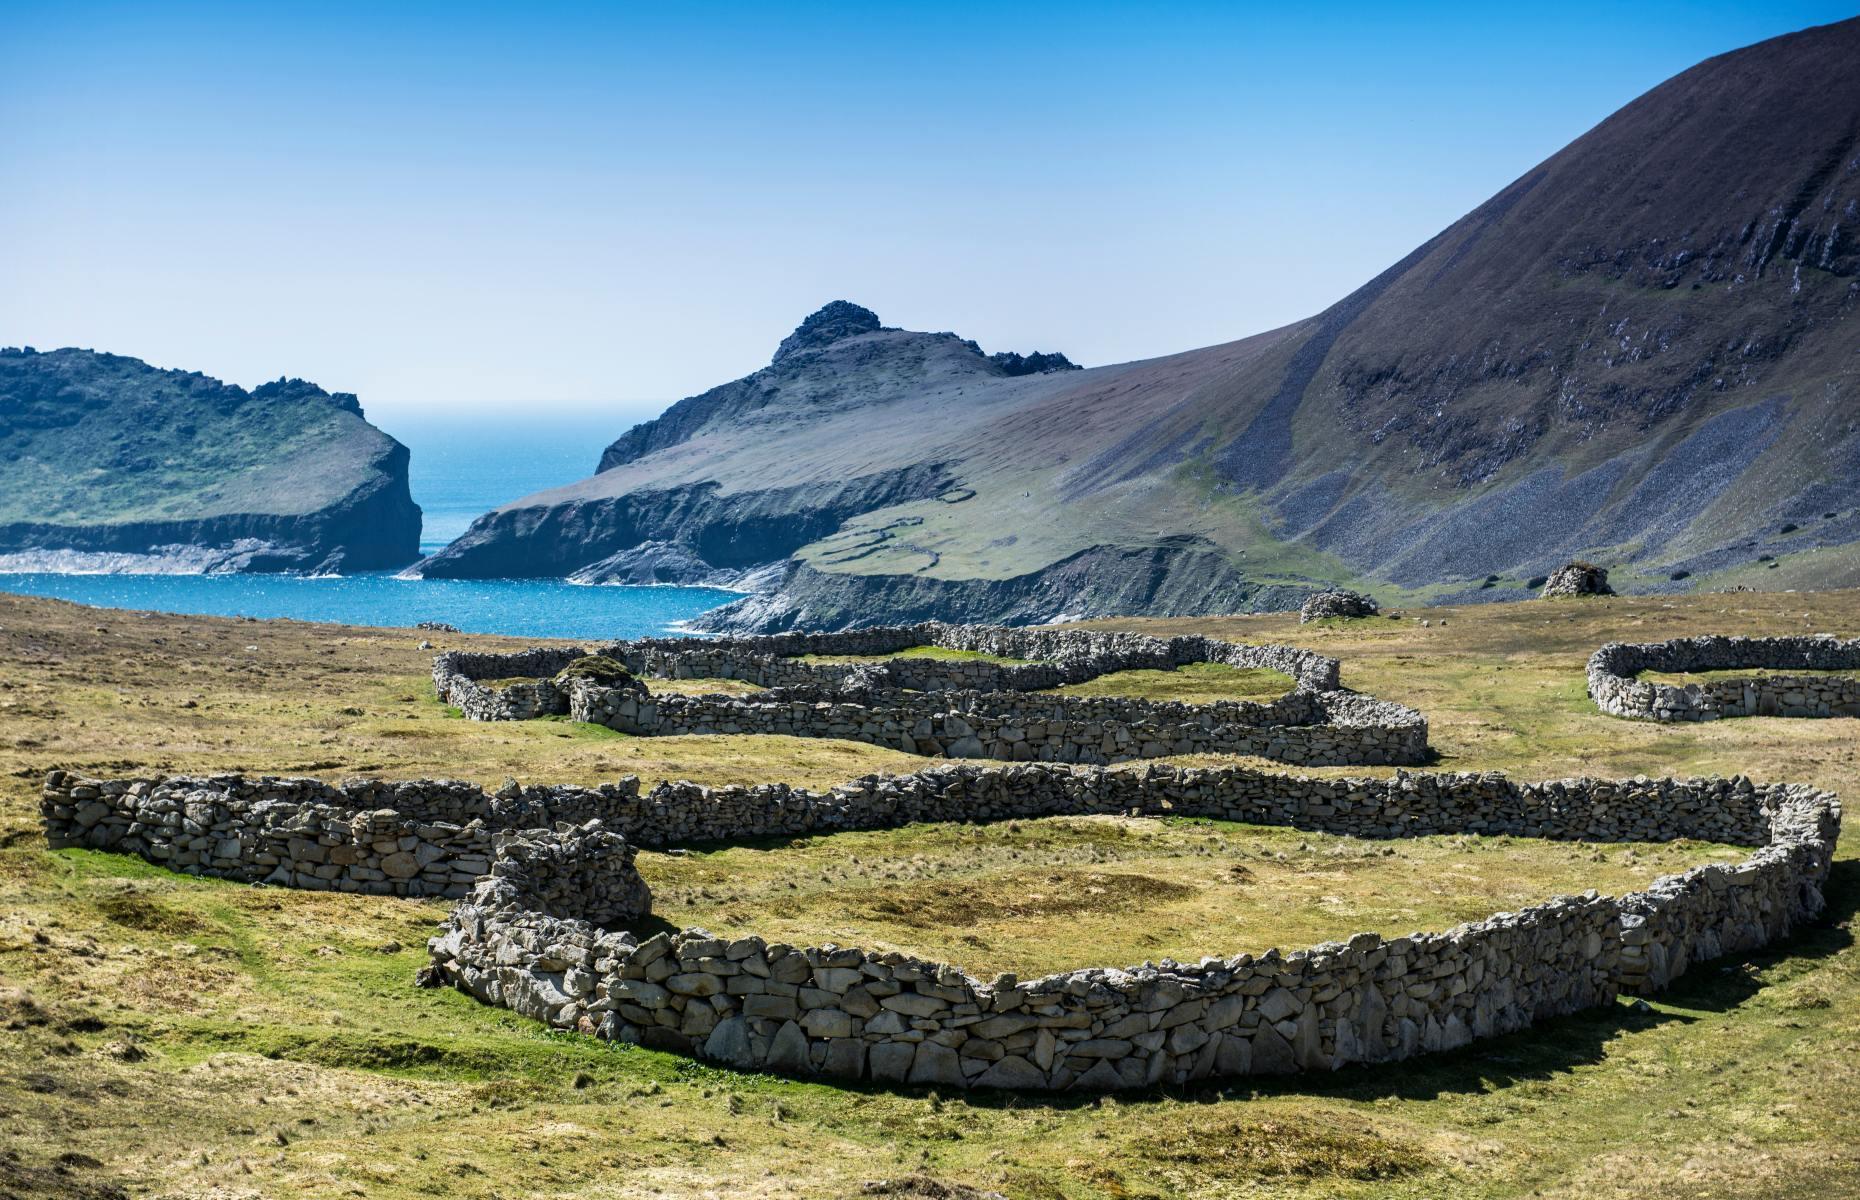 <p>Just off the western coast of Scotland, <a href="https://www.nts.org.uk/visit/places/st-kilda">St Kilda</a> is the most remote part of the British Isles. Hirta is the largest island of the rugged archipelago and was the first to be settled by humans around 4,000-5,000 years ago. By the 1930s Hirta’s last few residents had departed the inhospitable environment for mainland Scotland. Today it’s better known for its birdlife, although stone settlements remain dotted across the island, serving as an eerie reminder of the past.</p>